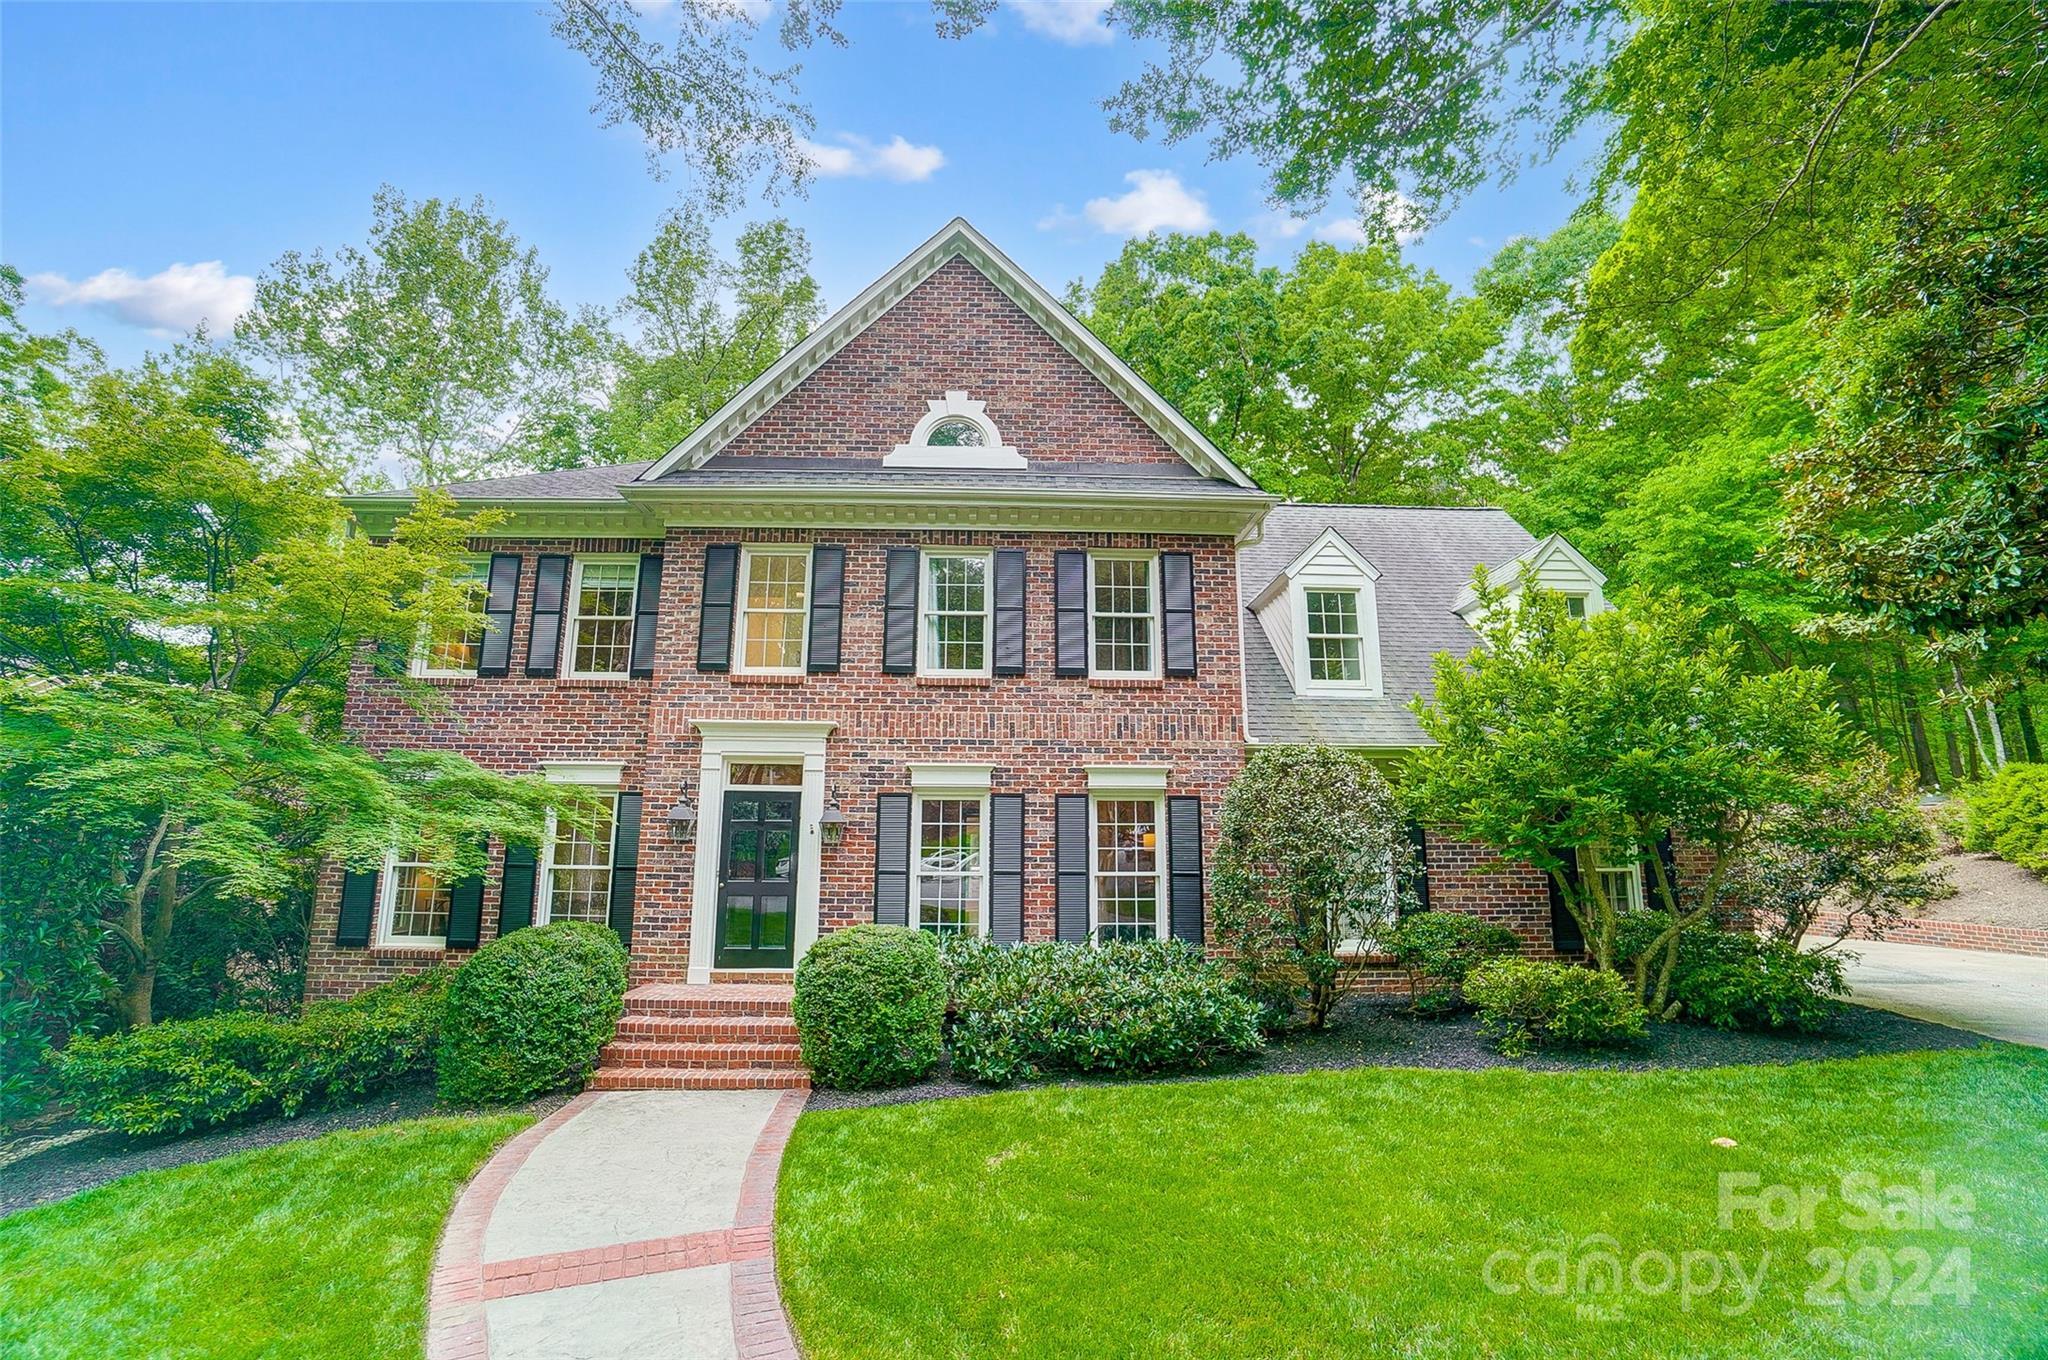 Photo one of 2432 Hartmill Ct Charlotte NC 28226 | MLS 4134116